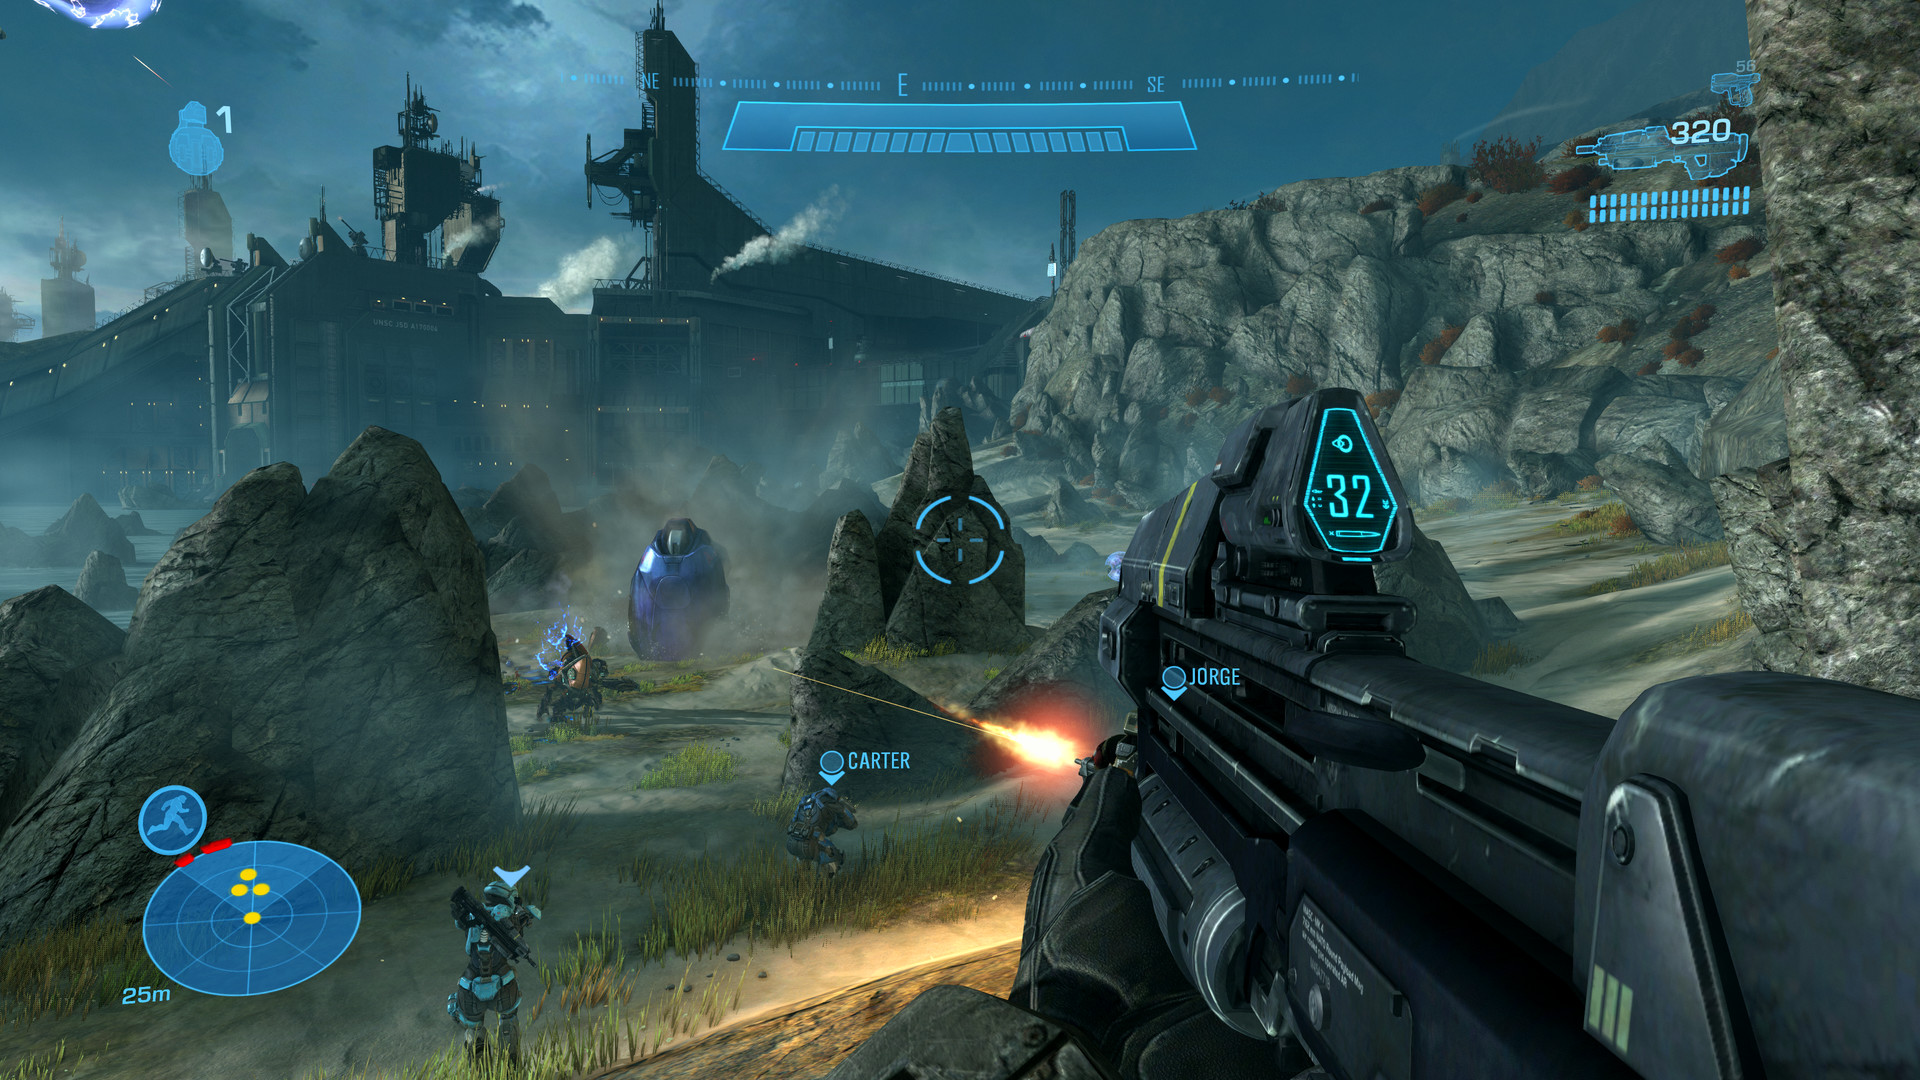 Russia's free, PC multiplayer Halo game has been cancelled